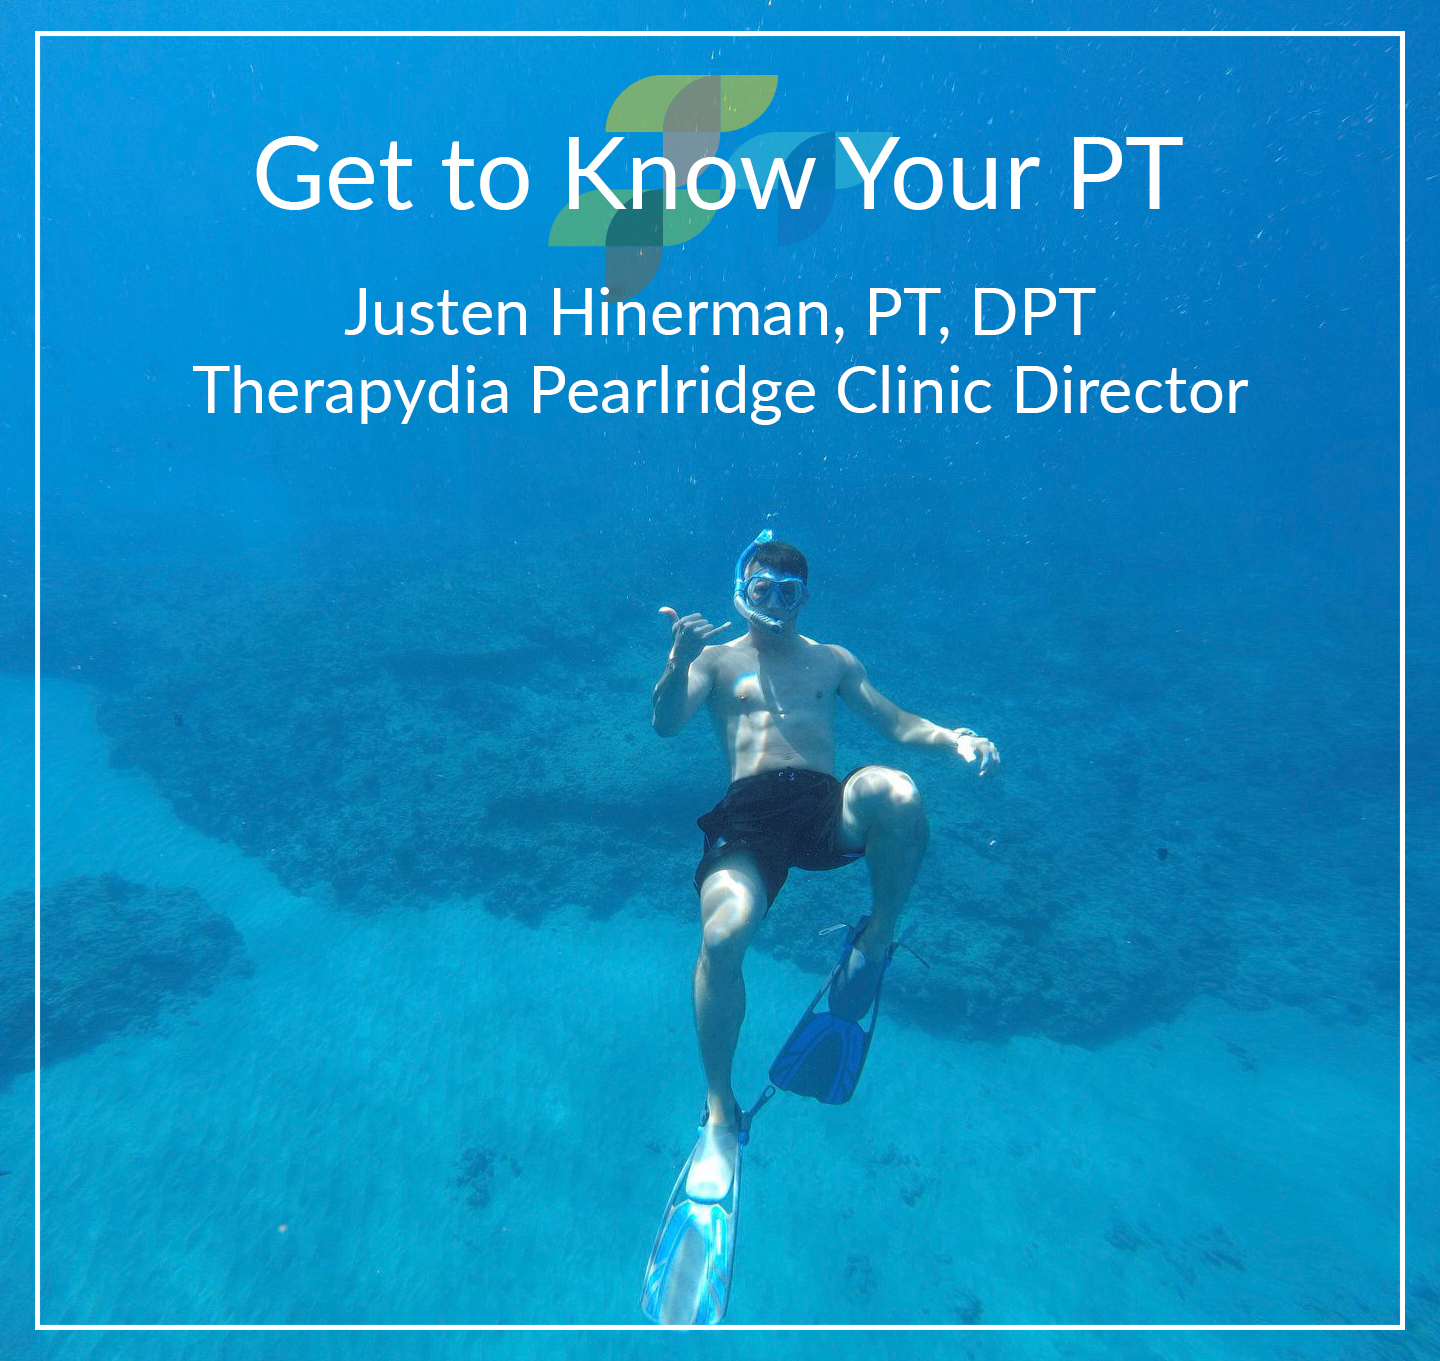 Get to Know Your PT – Justen Hinerman, Therapydia Pearlridge